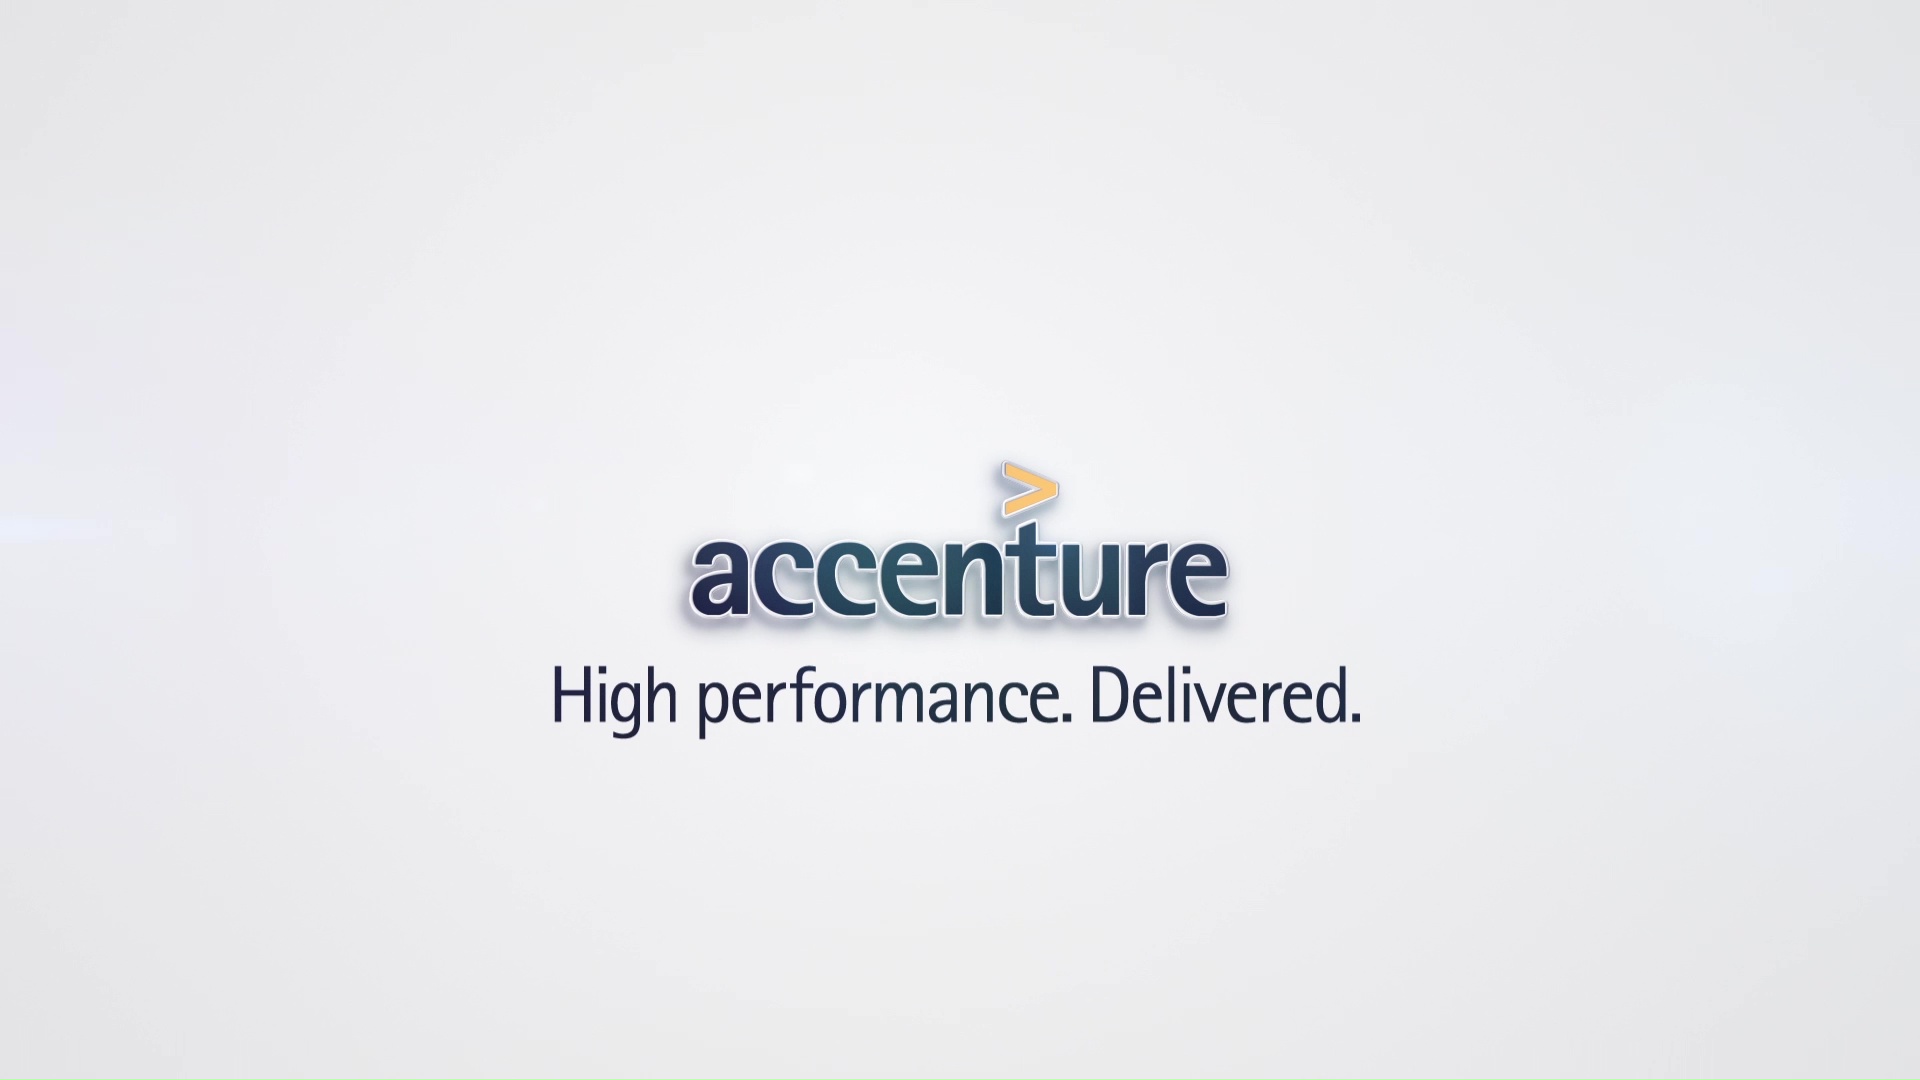 accenture High Perforrmance, Delivered